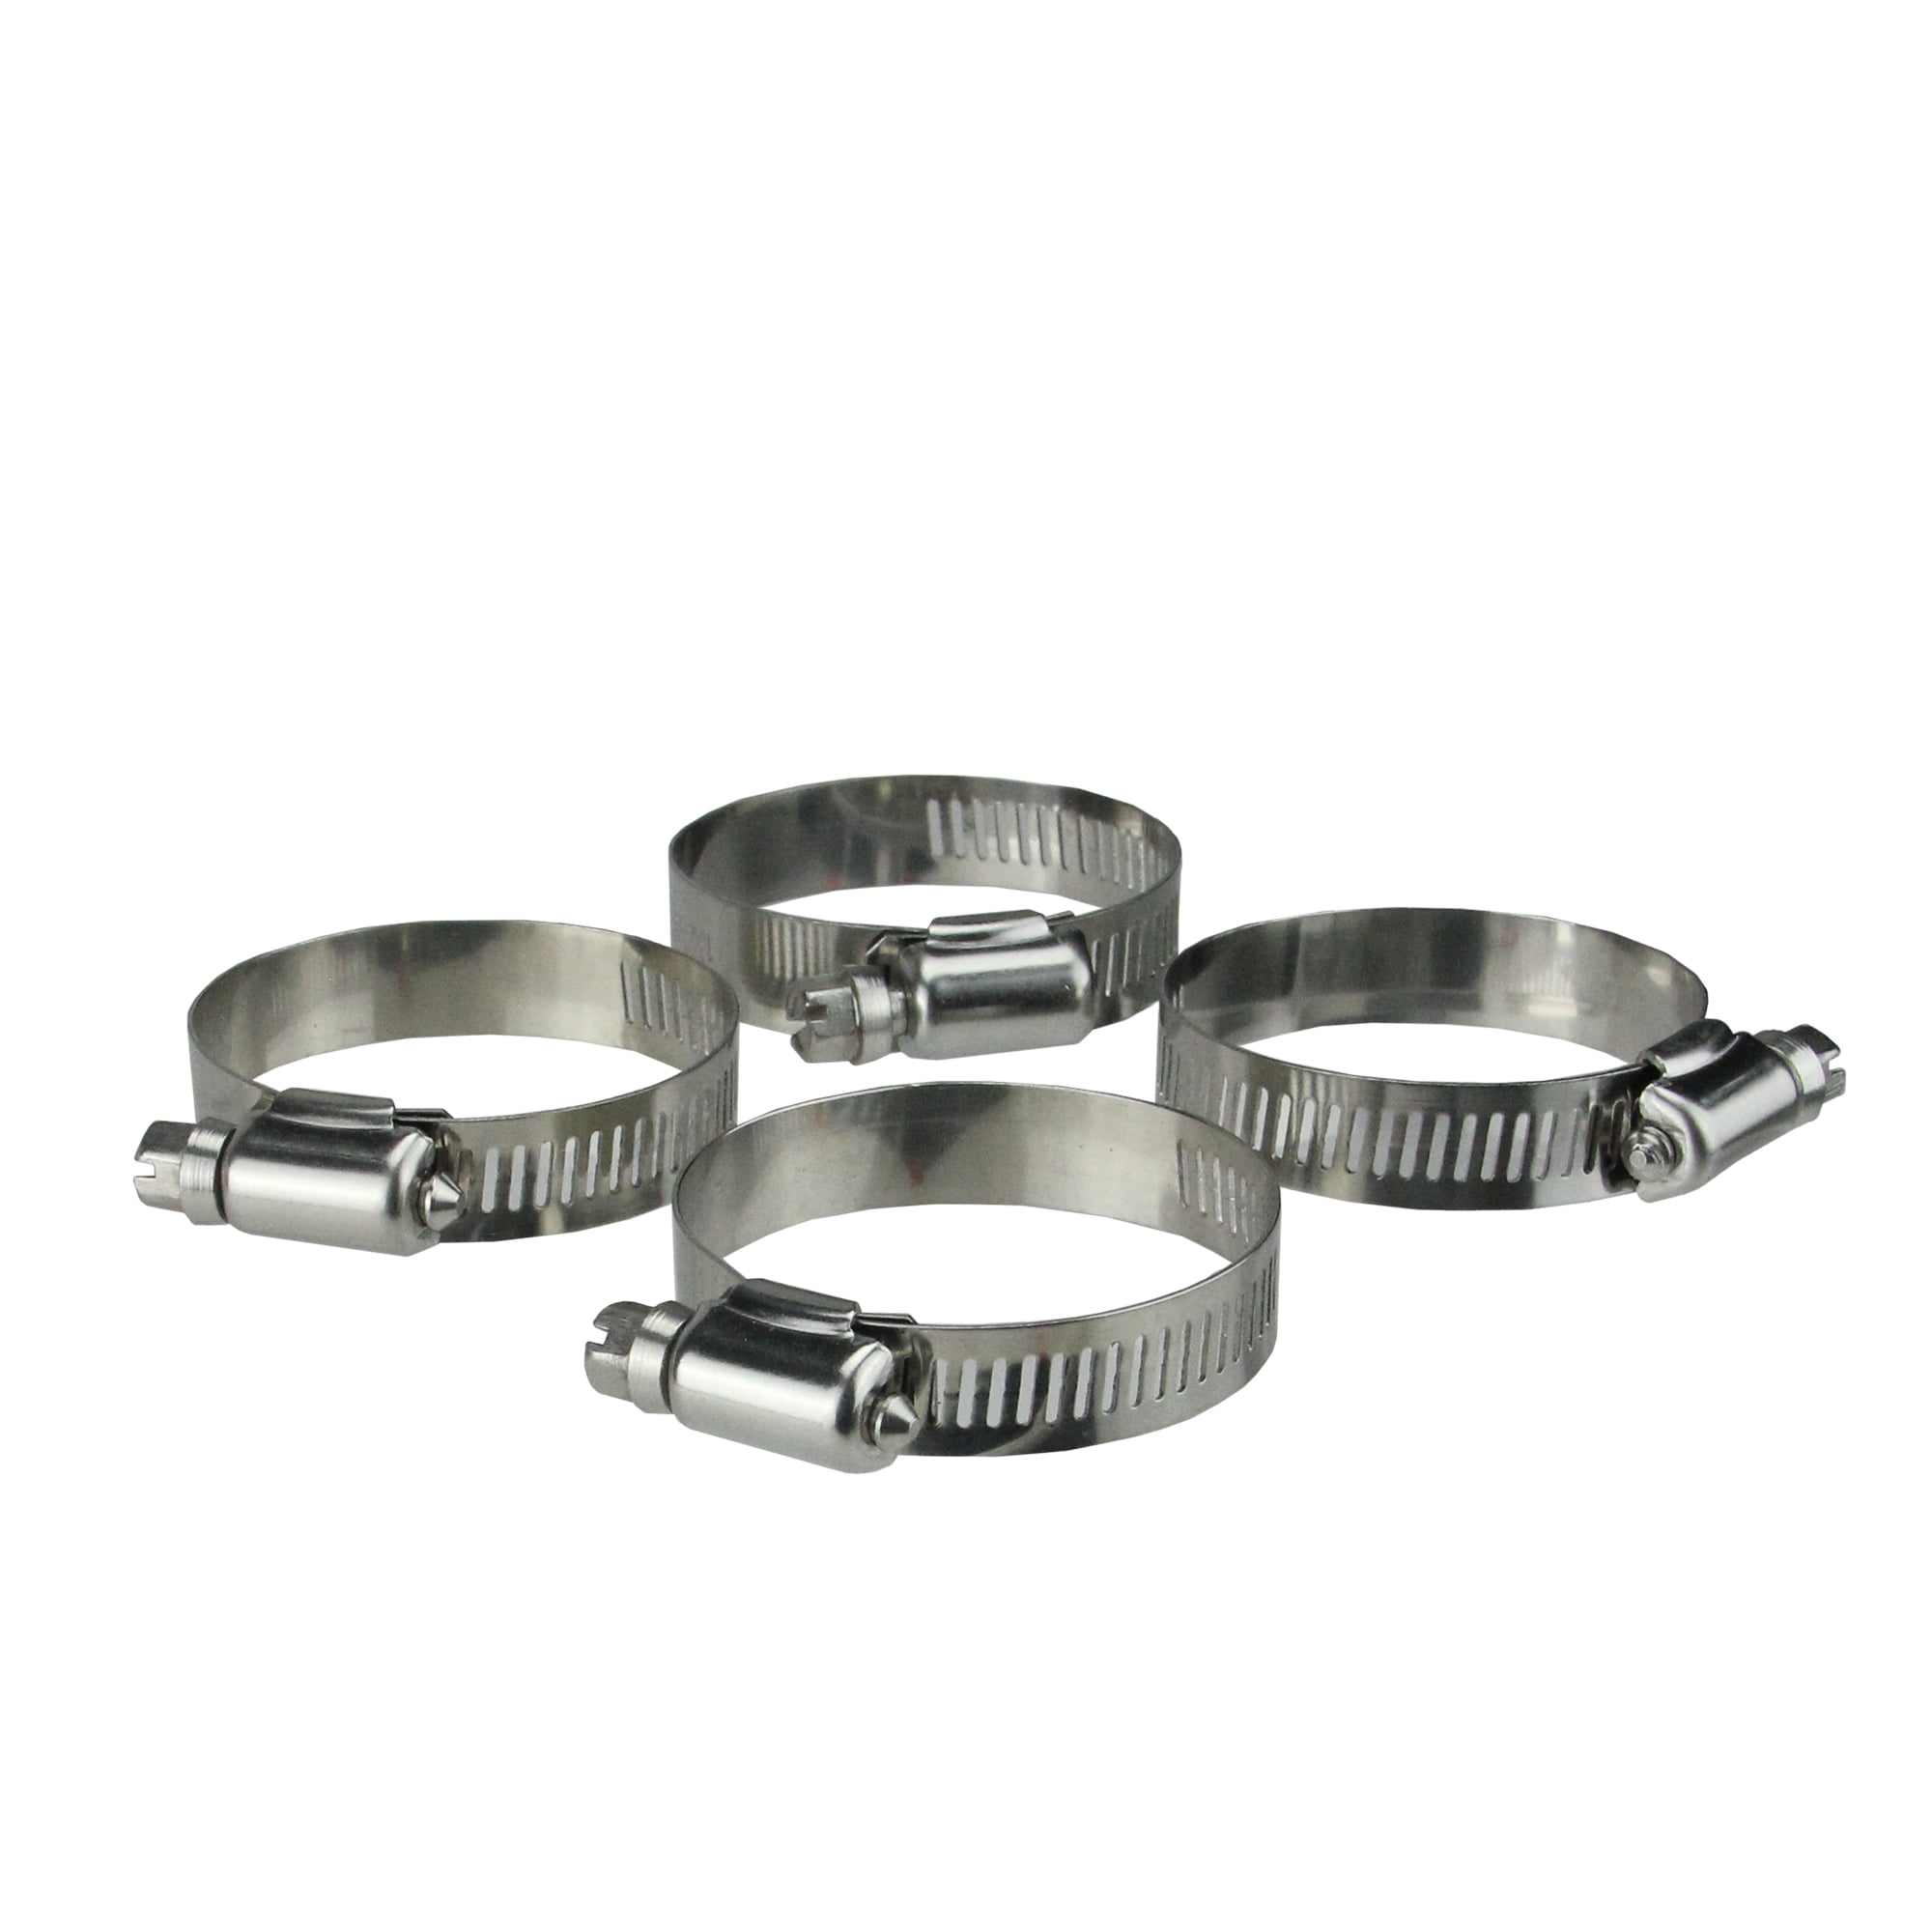 Adjusting Stainless Steel  Blue Band Hose Clamp 38mm-50mm 